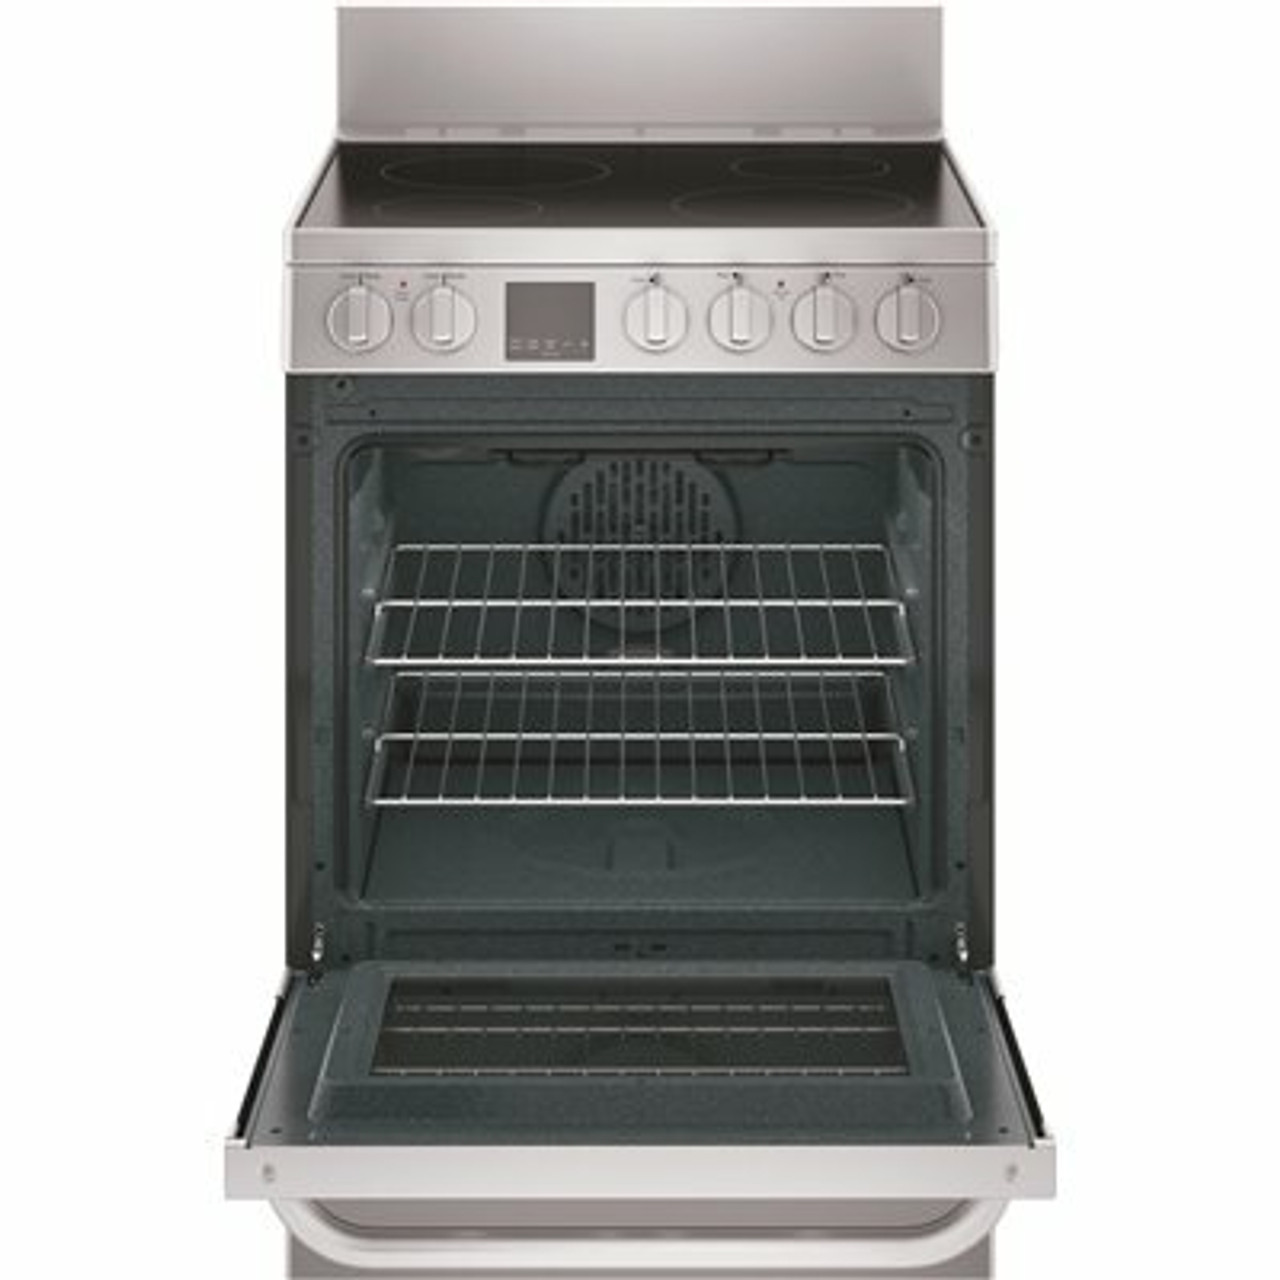 Haier 24 In. 2.9 Cu. Ft. Electric Range With Self-Cleaning Convection Oven In Stainless Steel